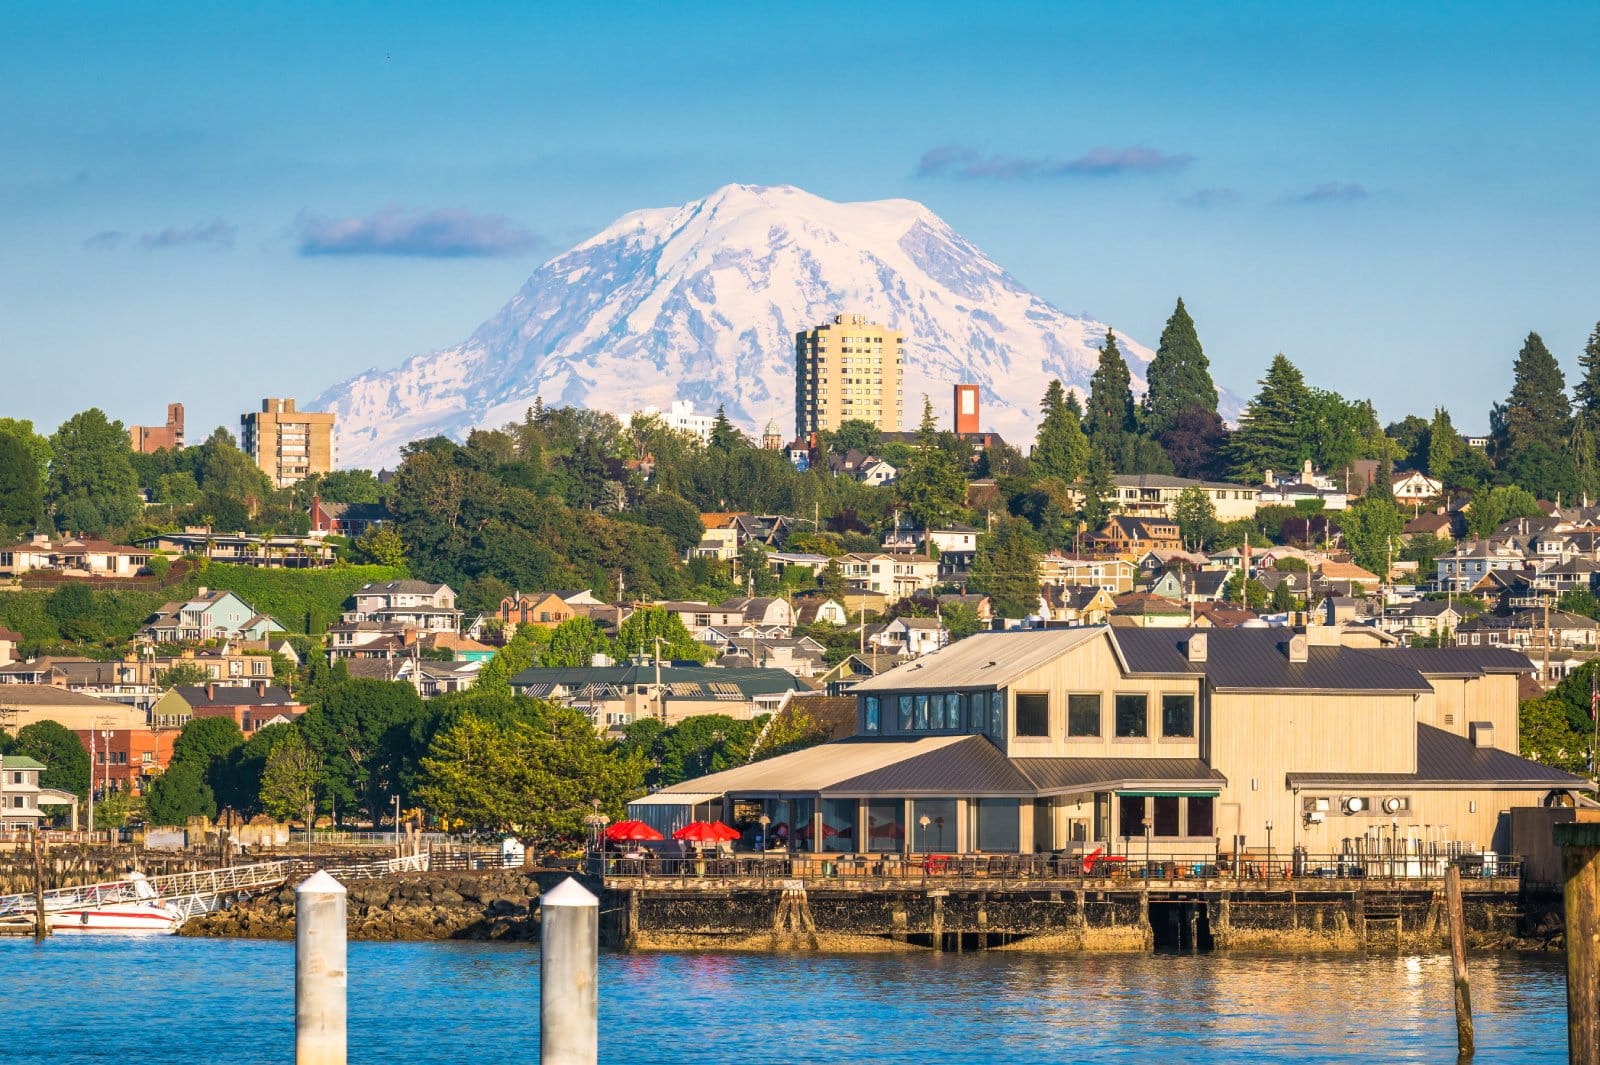 <p class="wp-caption-text">Image Credit: Shutterstock / Sean Pavone</p>  <p><span>Discover Tacoma’s vibrant arts scene, historic waterfront, and lush parks. It’s a city that combines natural beauty with a rich cultural tapestry, less than an hour from Seattle.</span></p>